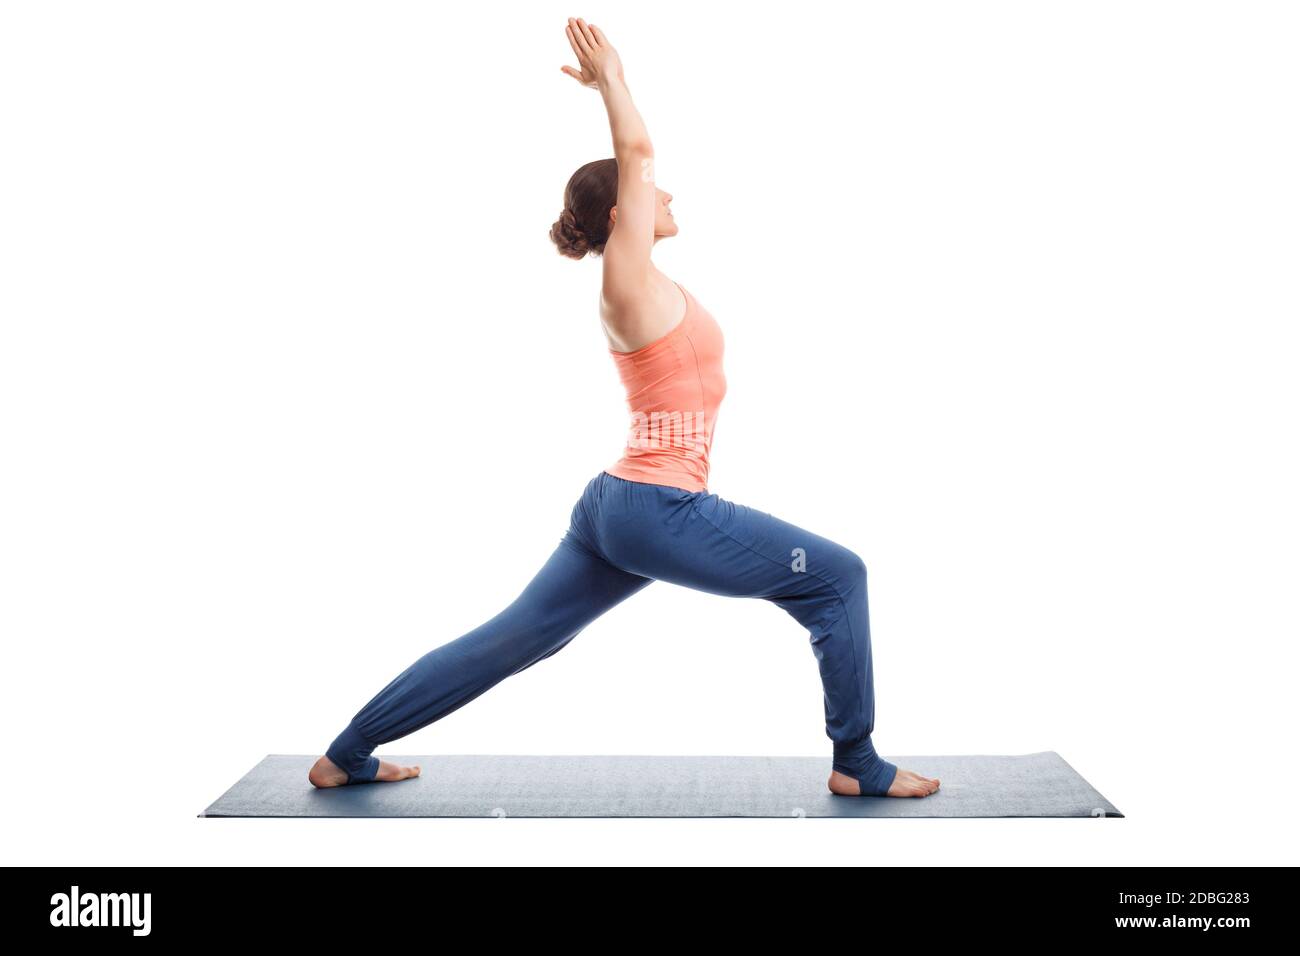 The Yoga Warrior Pose Explained: The 5 Warrior Poses